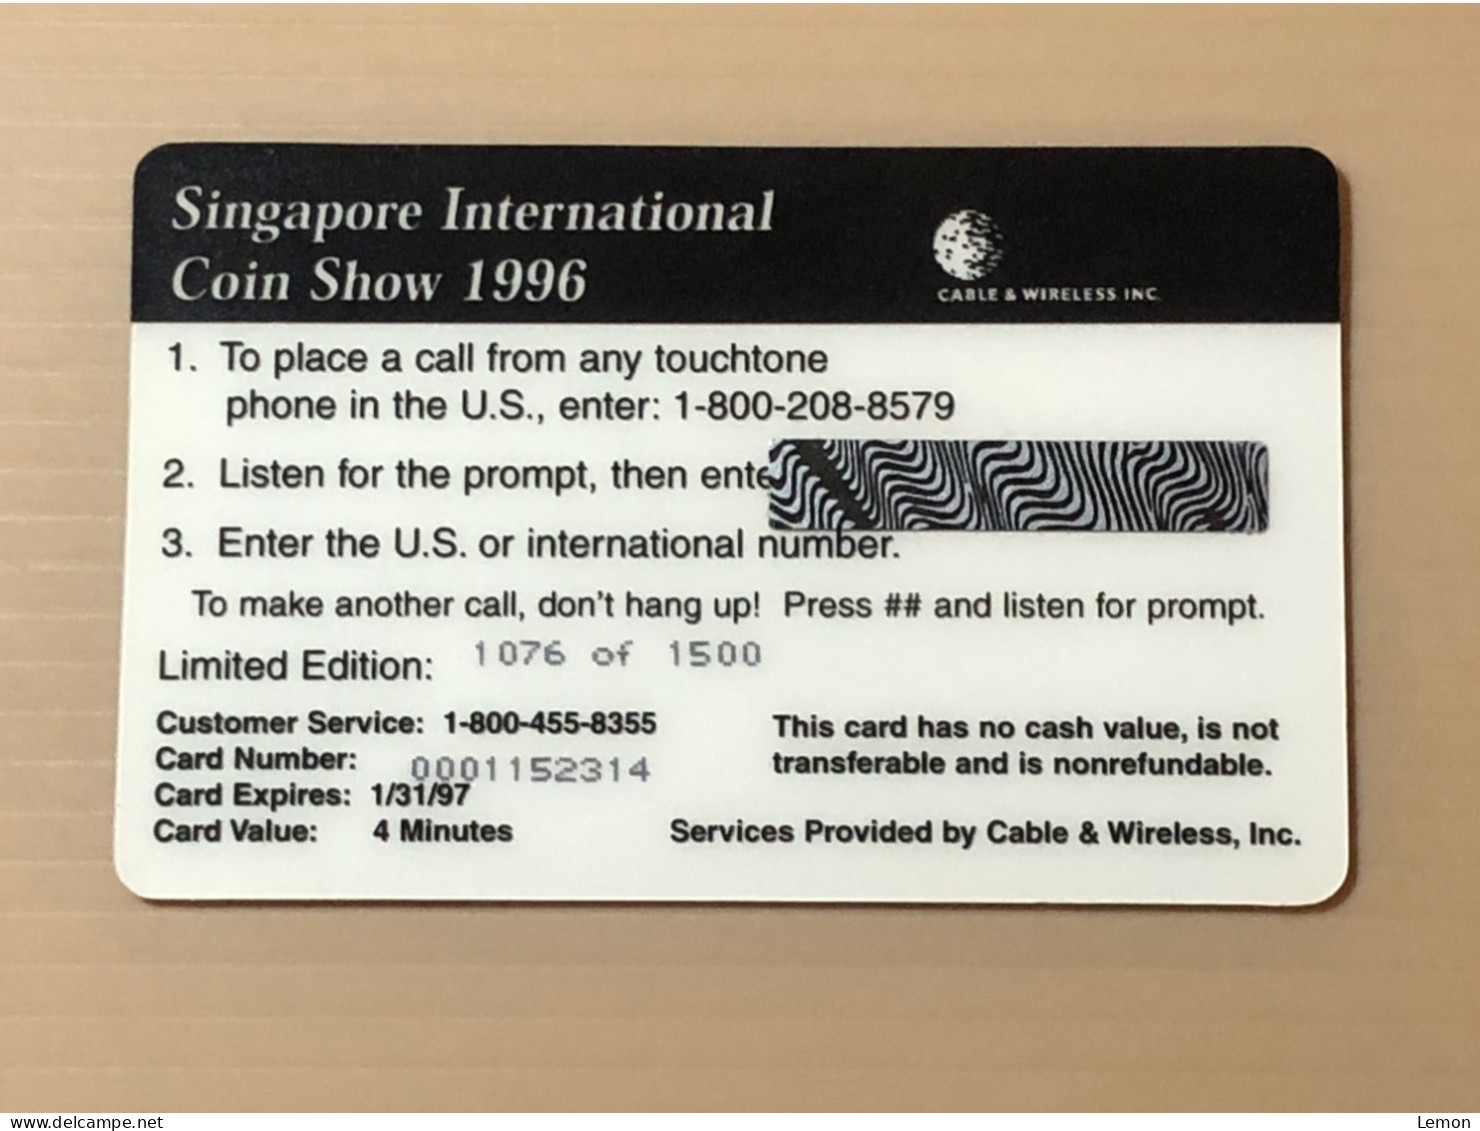 Mint USA UNITED STATES America Prepaid Telecard Phonecard, Singapore International Coin Show(1500EX), Set Of 1 Mint Card - Colecciones